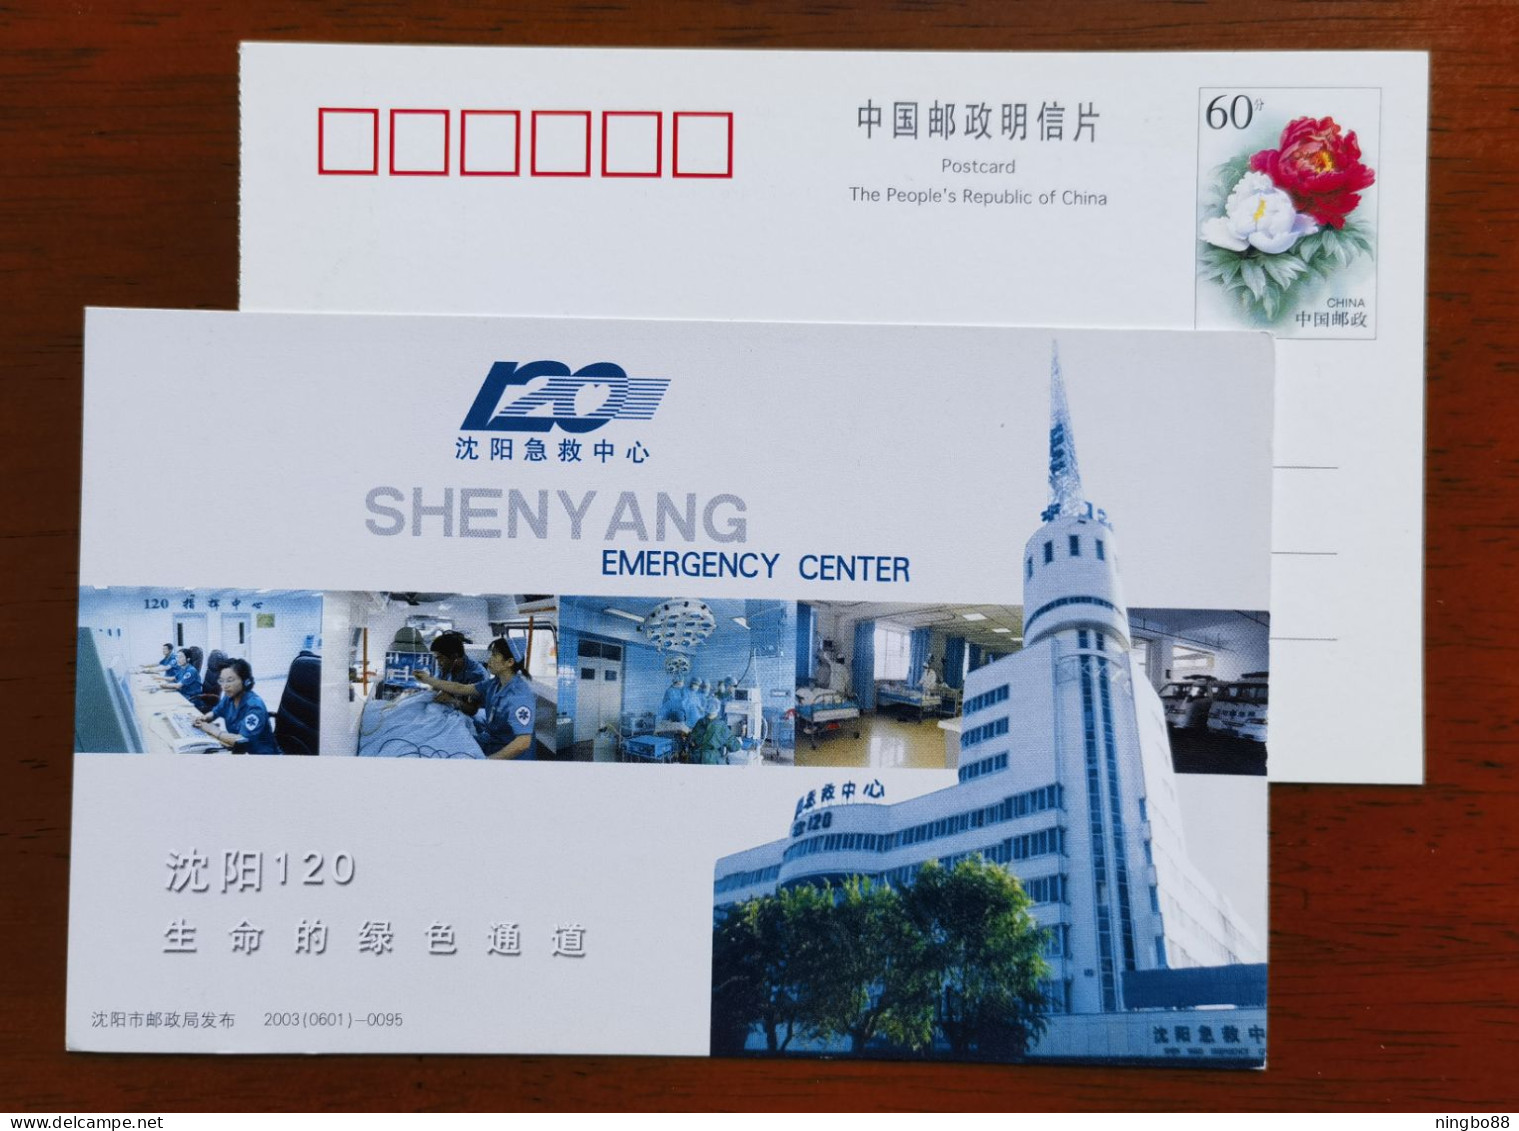 120 The Green Channel Of Life,Command Center,ambulance,China 2003 Shenyang Emergency Center Advertising Pre-stamped Card - Primeros Auxilios